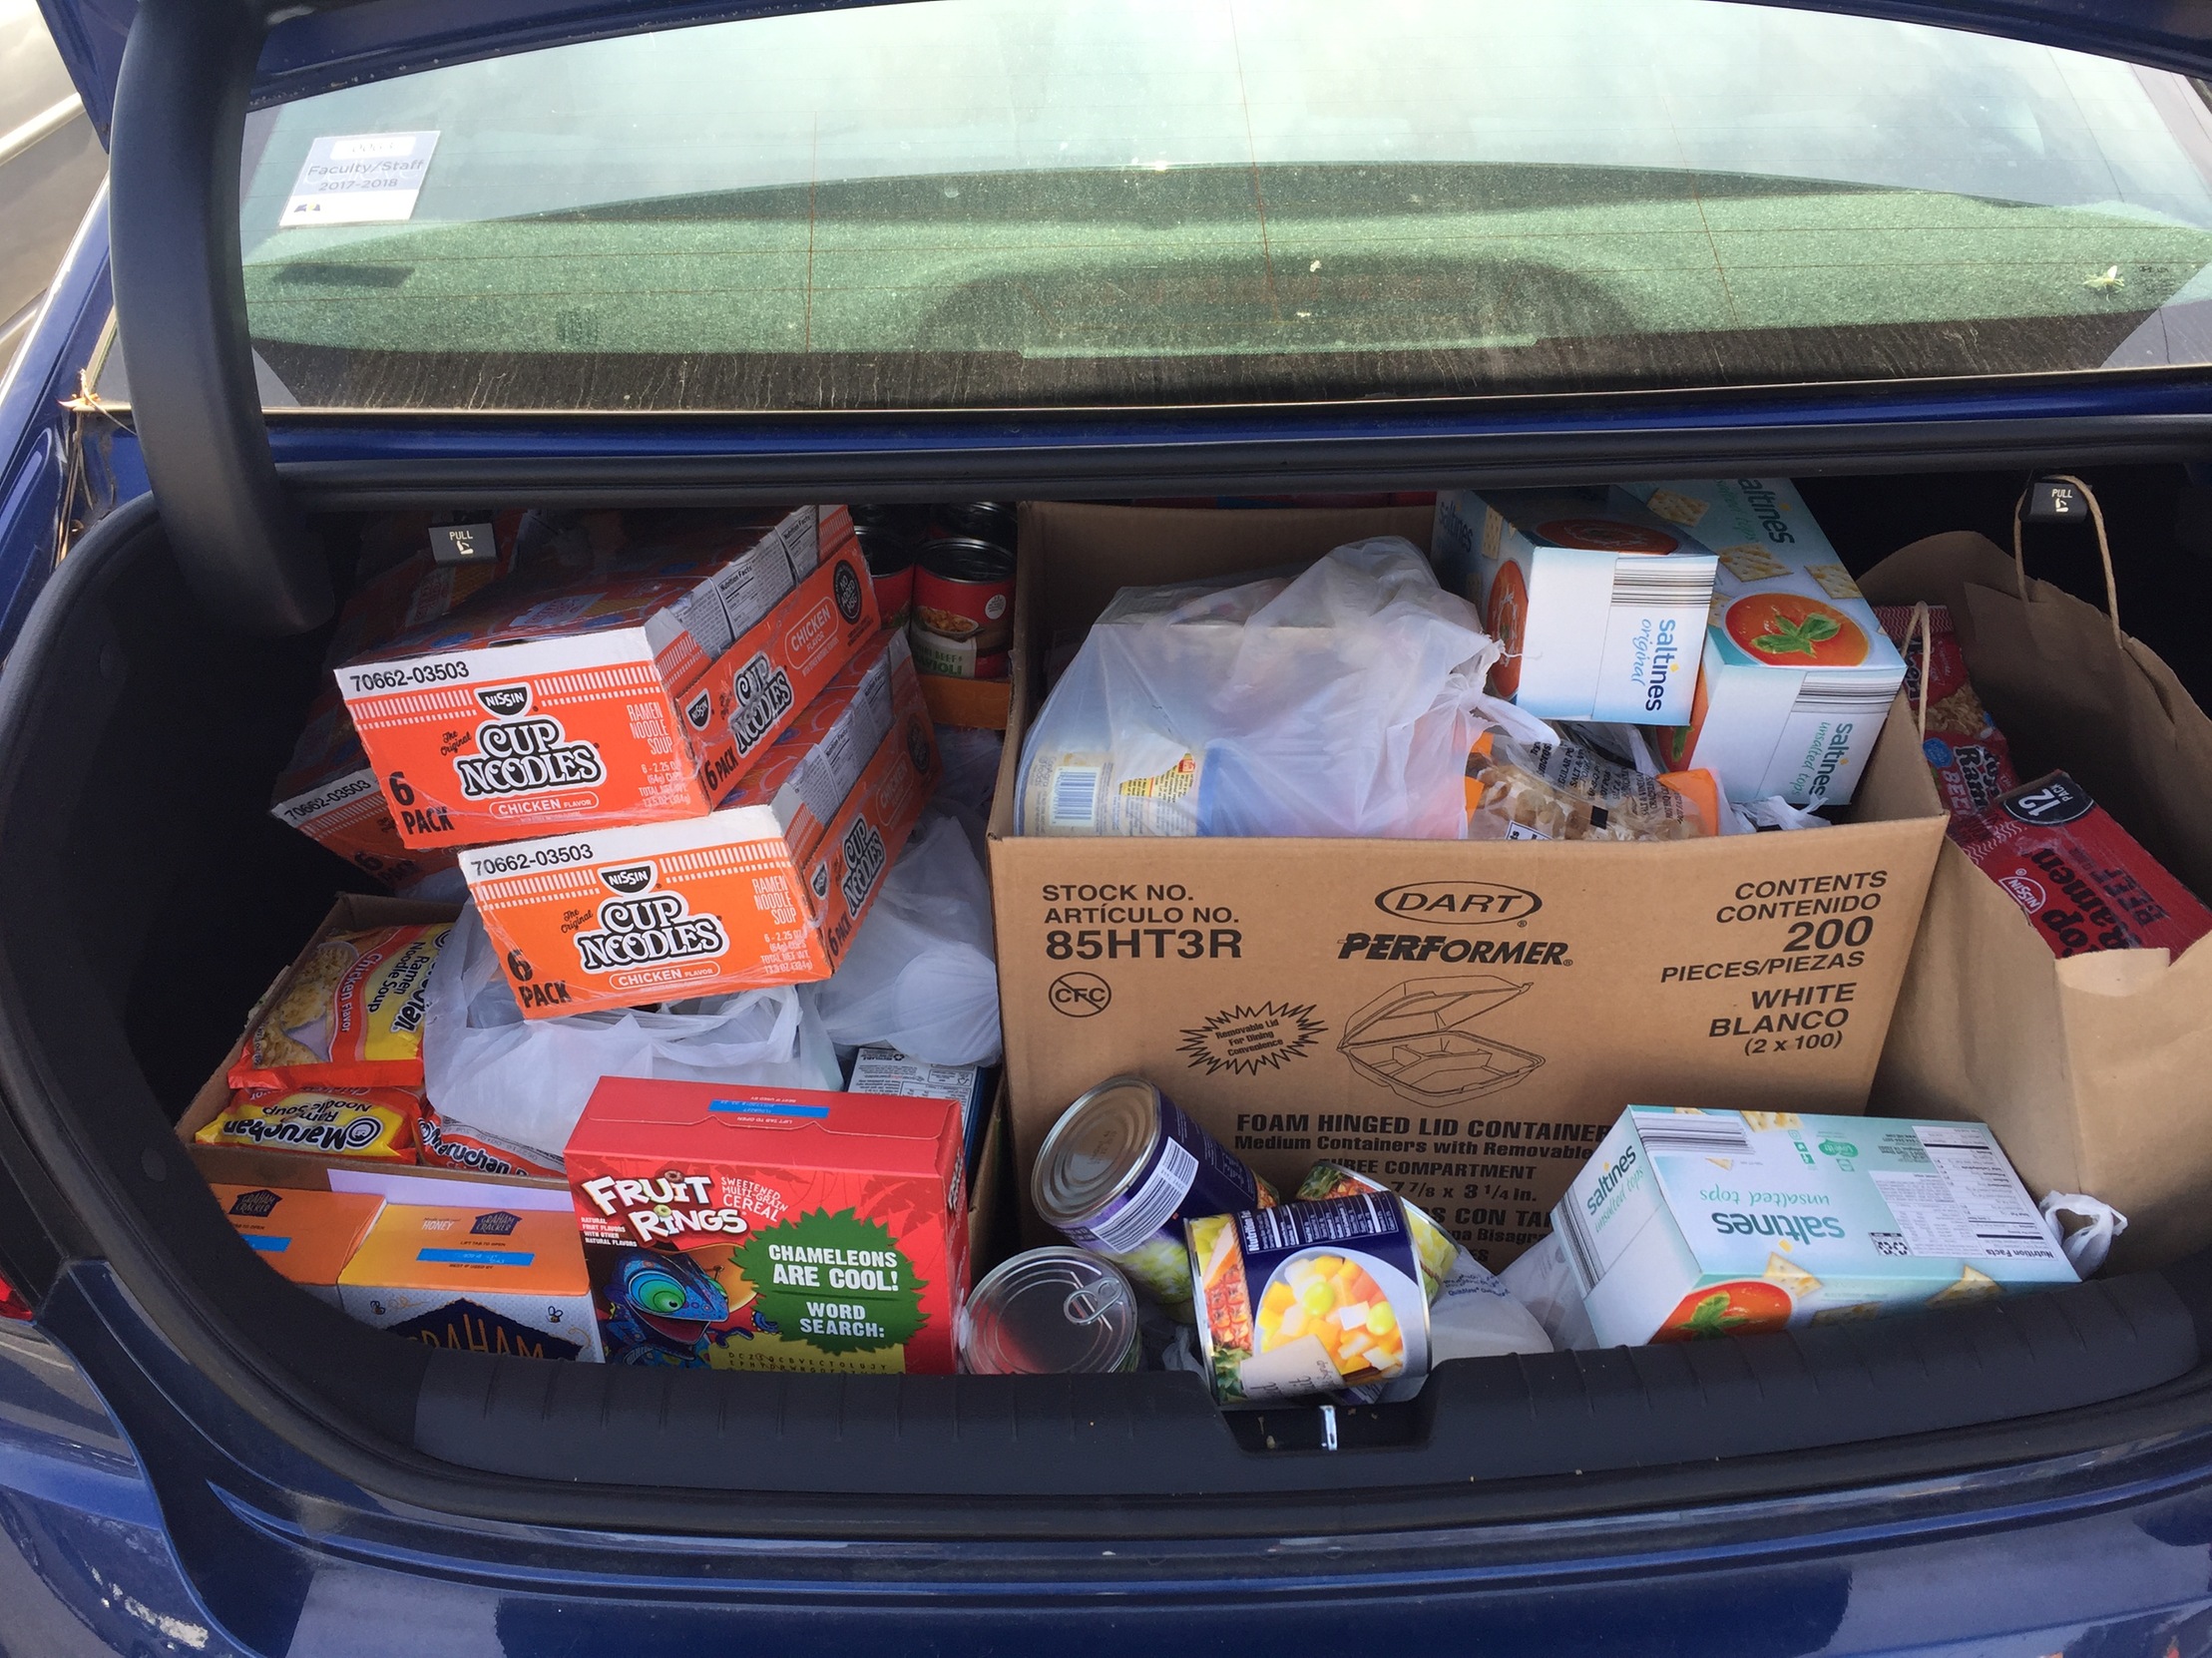 Bring 5 Canned Goods to Football Game Saturday, Get in Free